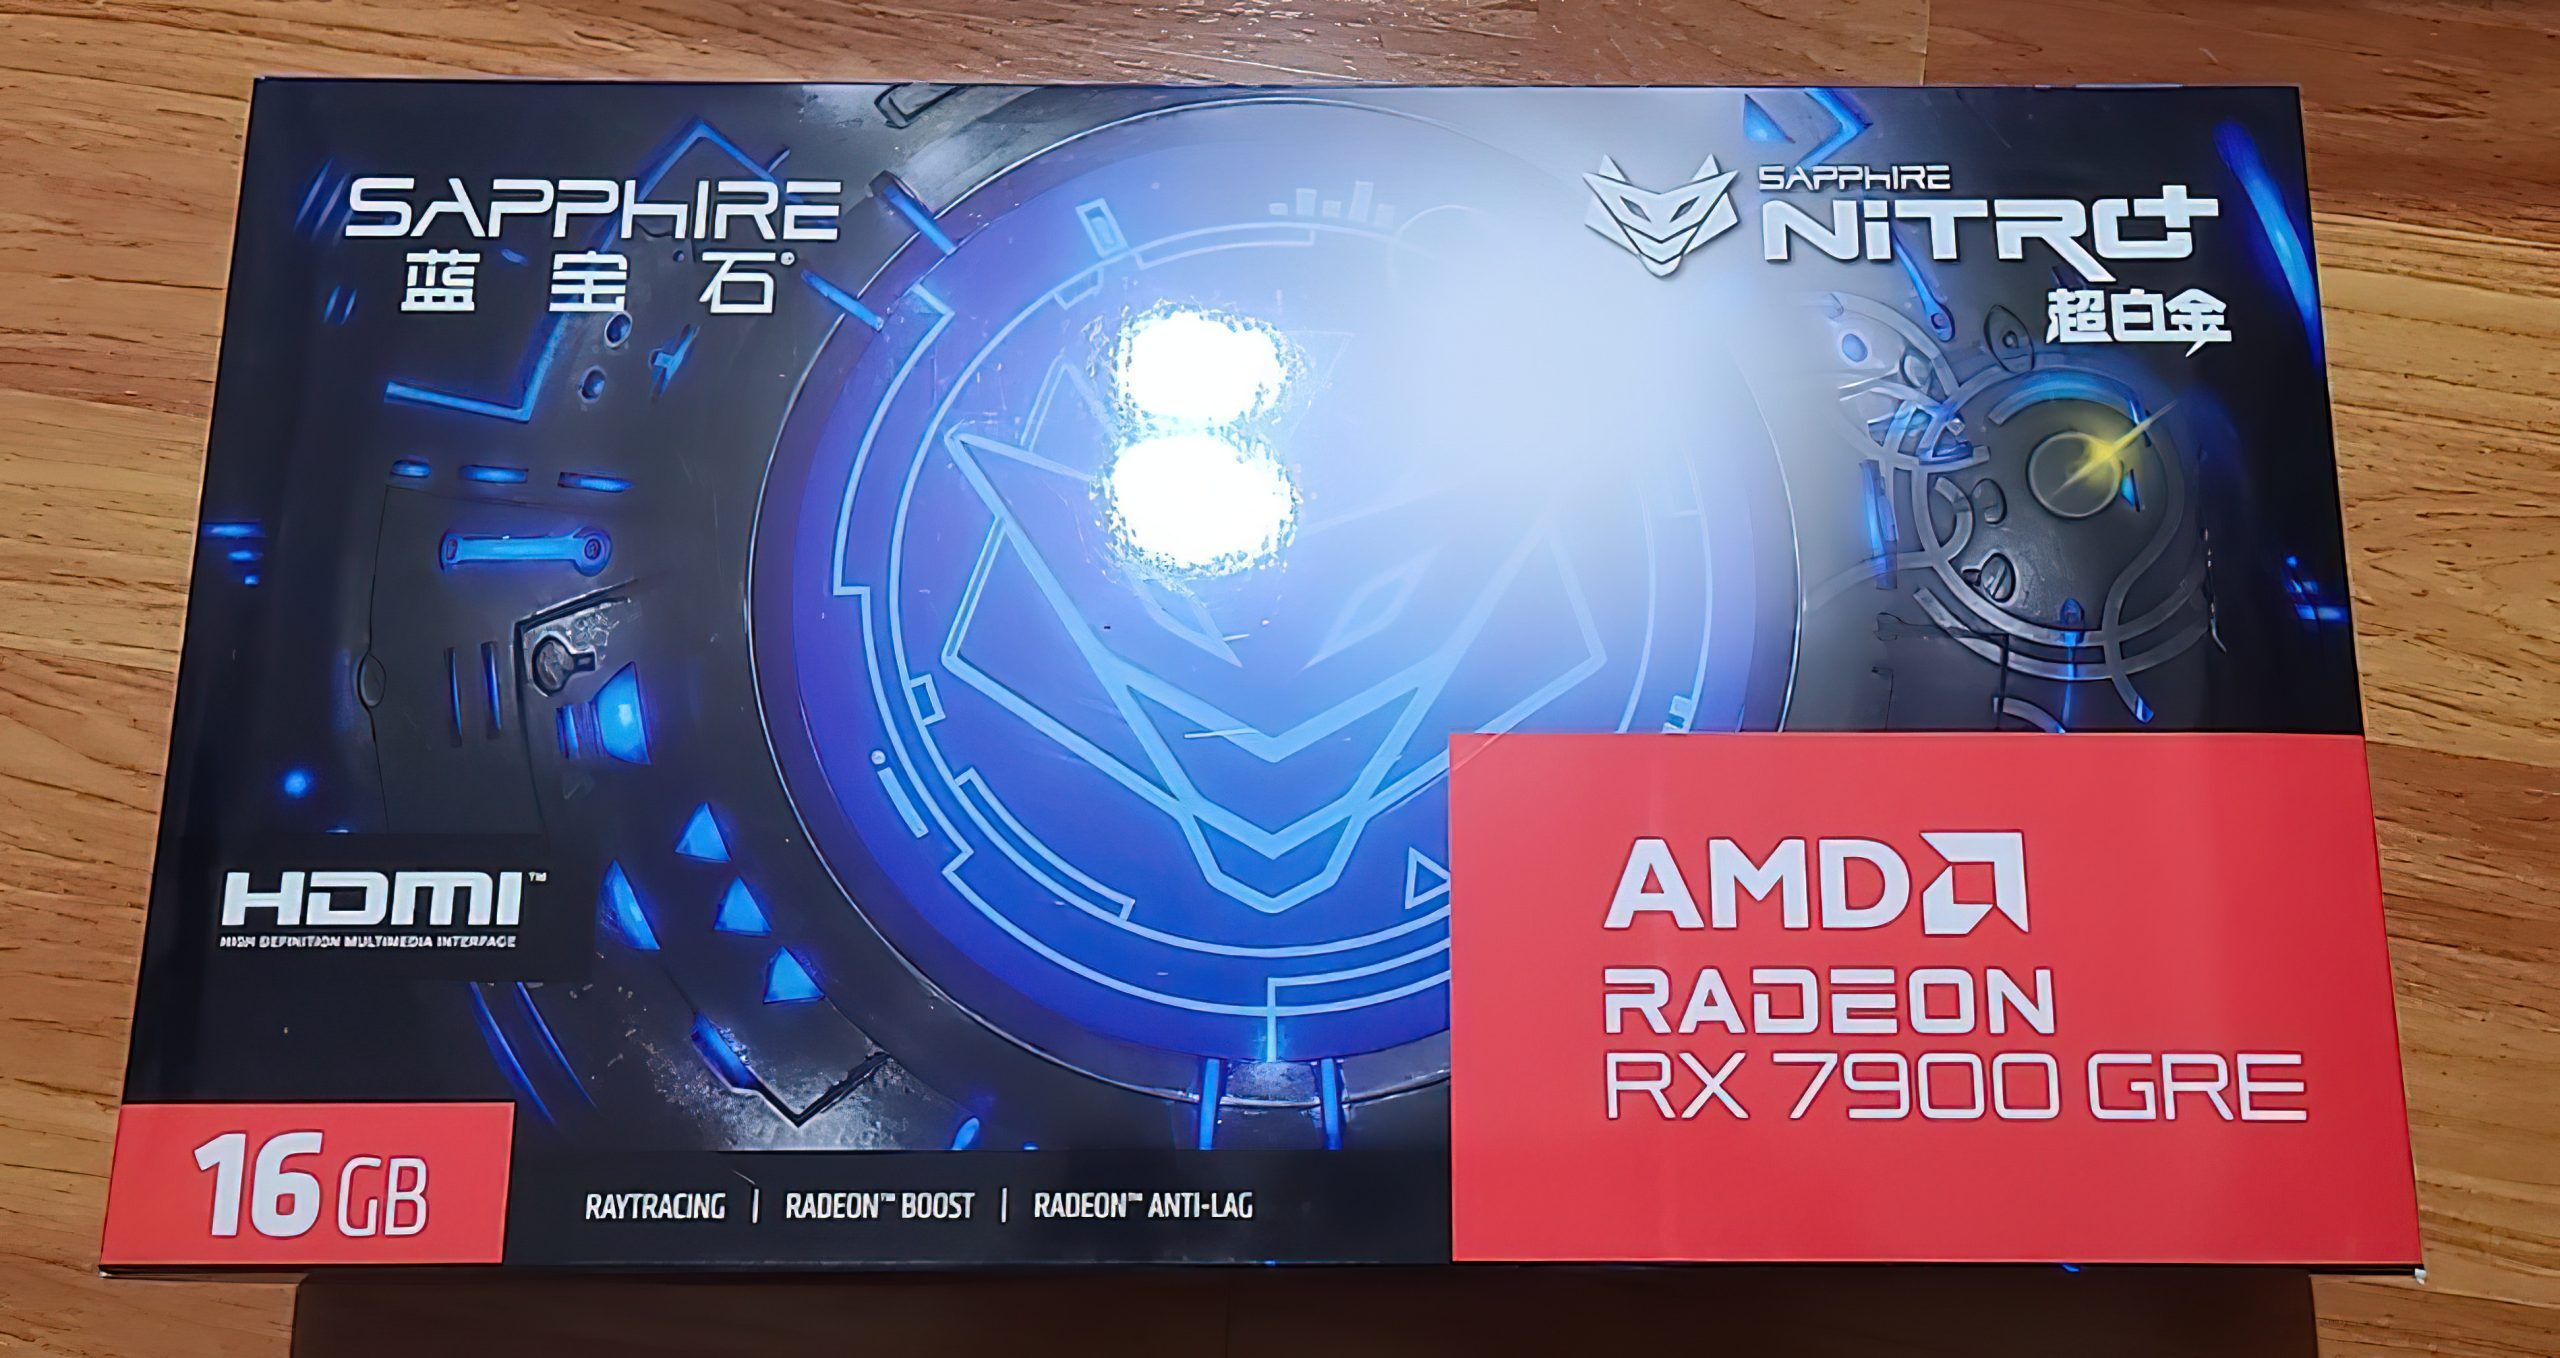 AMD Radeon RX 7900 GRE Spotted: Features 16GB of GDDR6 Memory